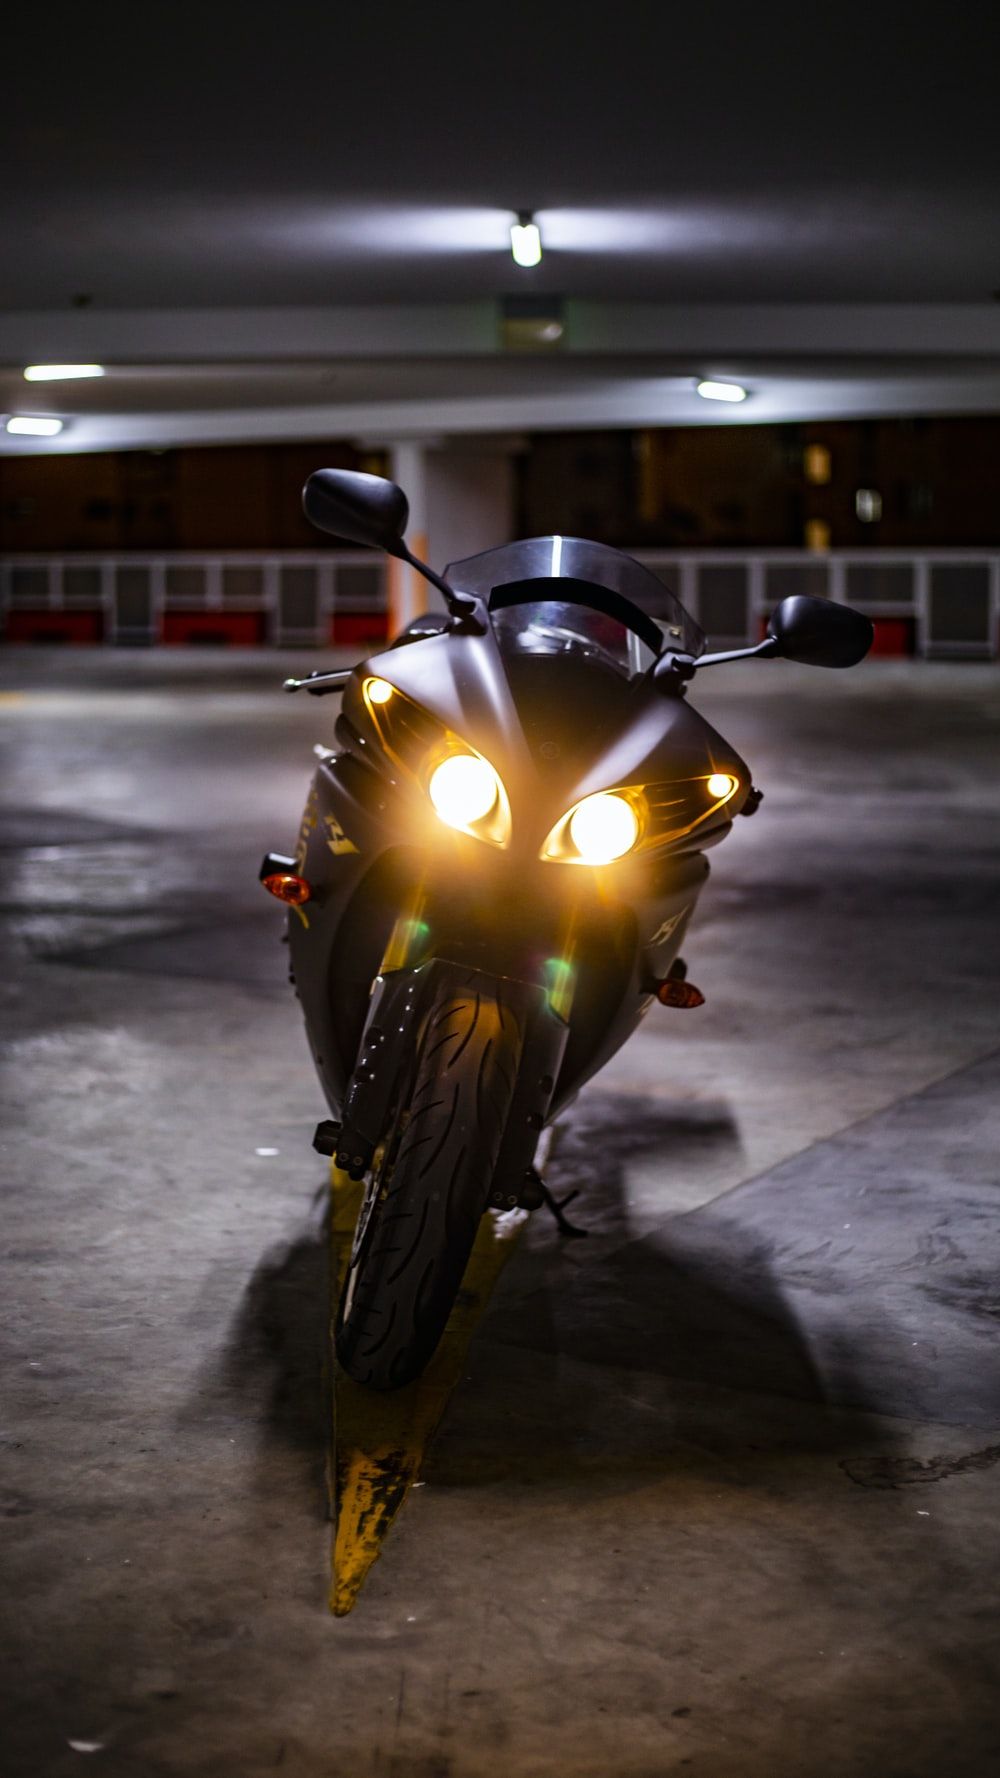 Yamaha R1 Picture. Download Free Image